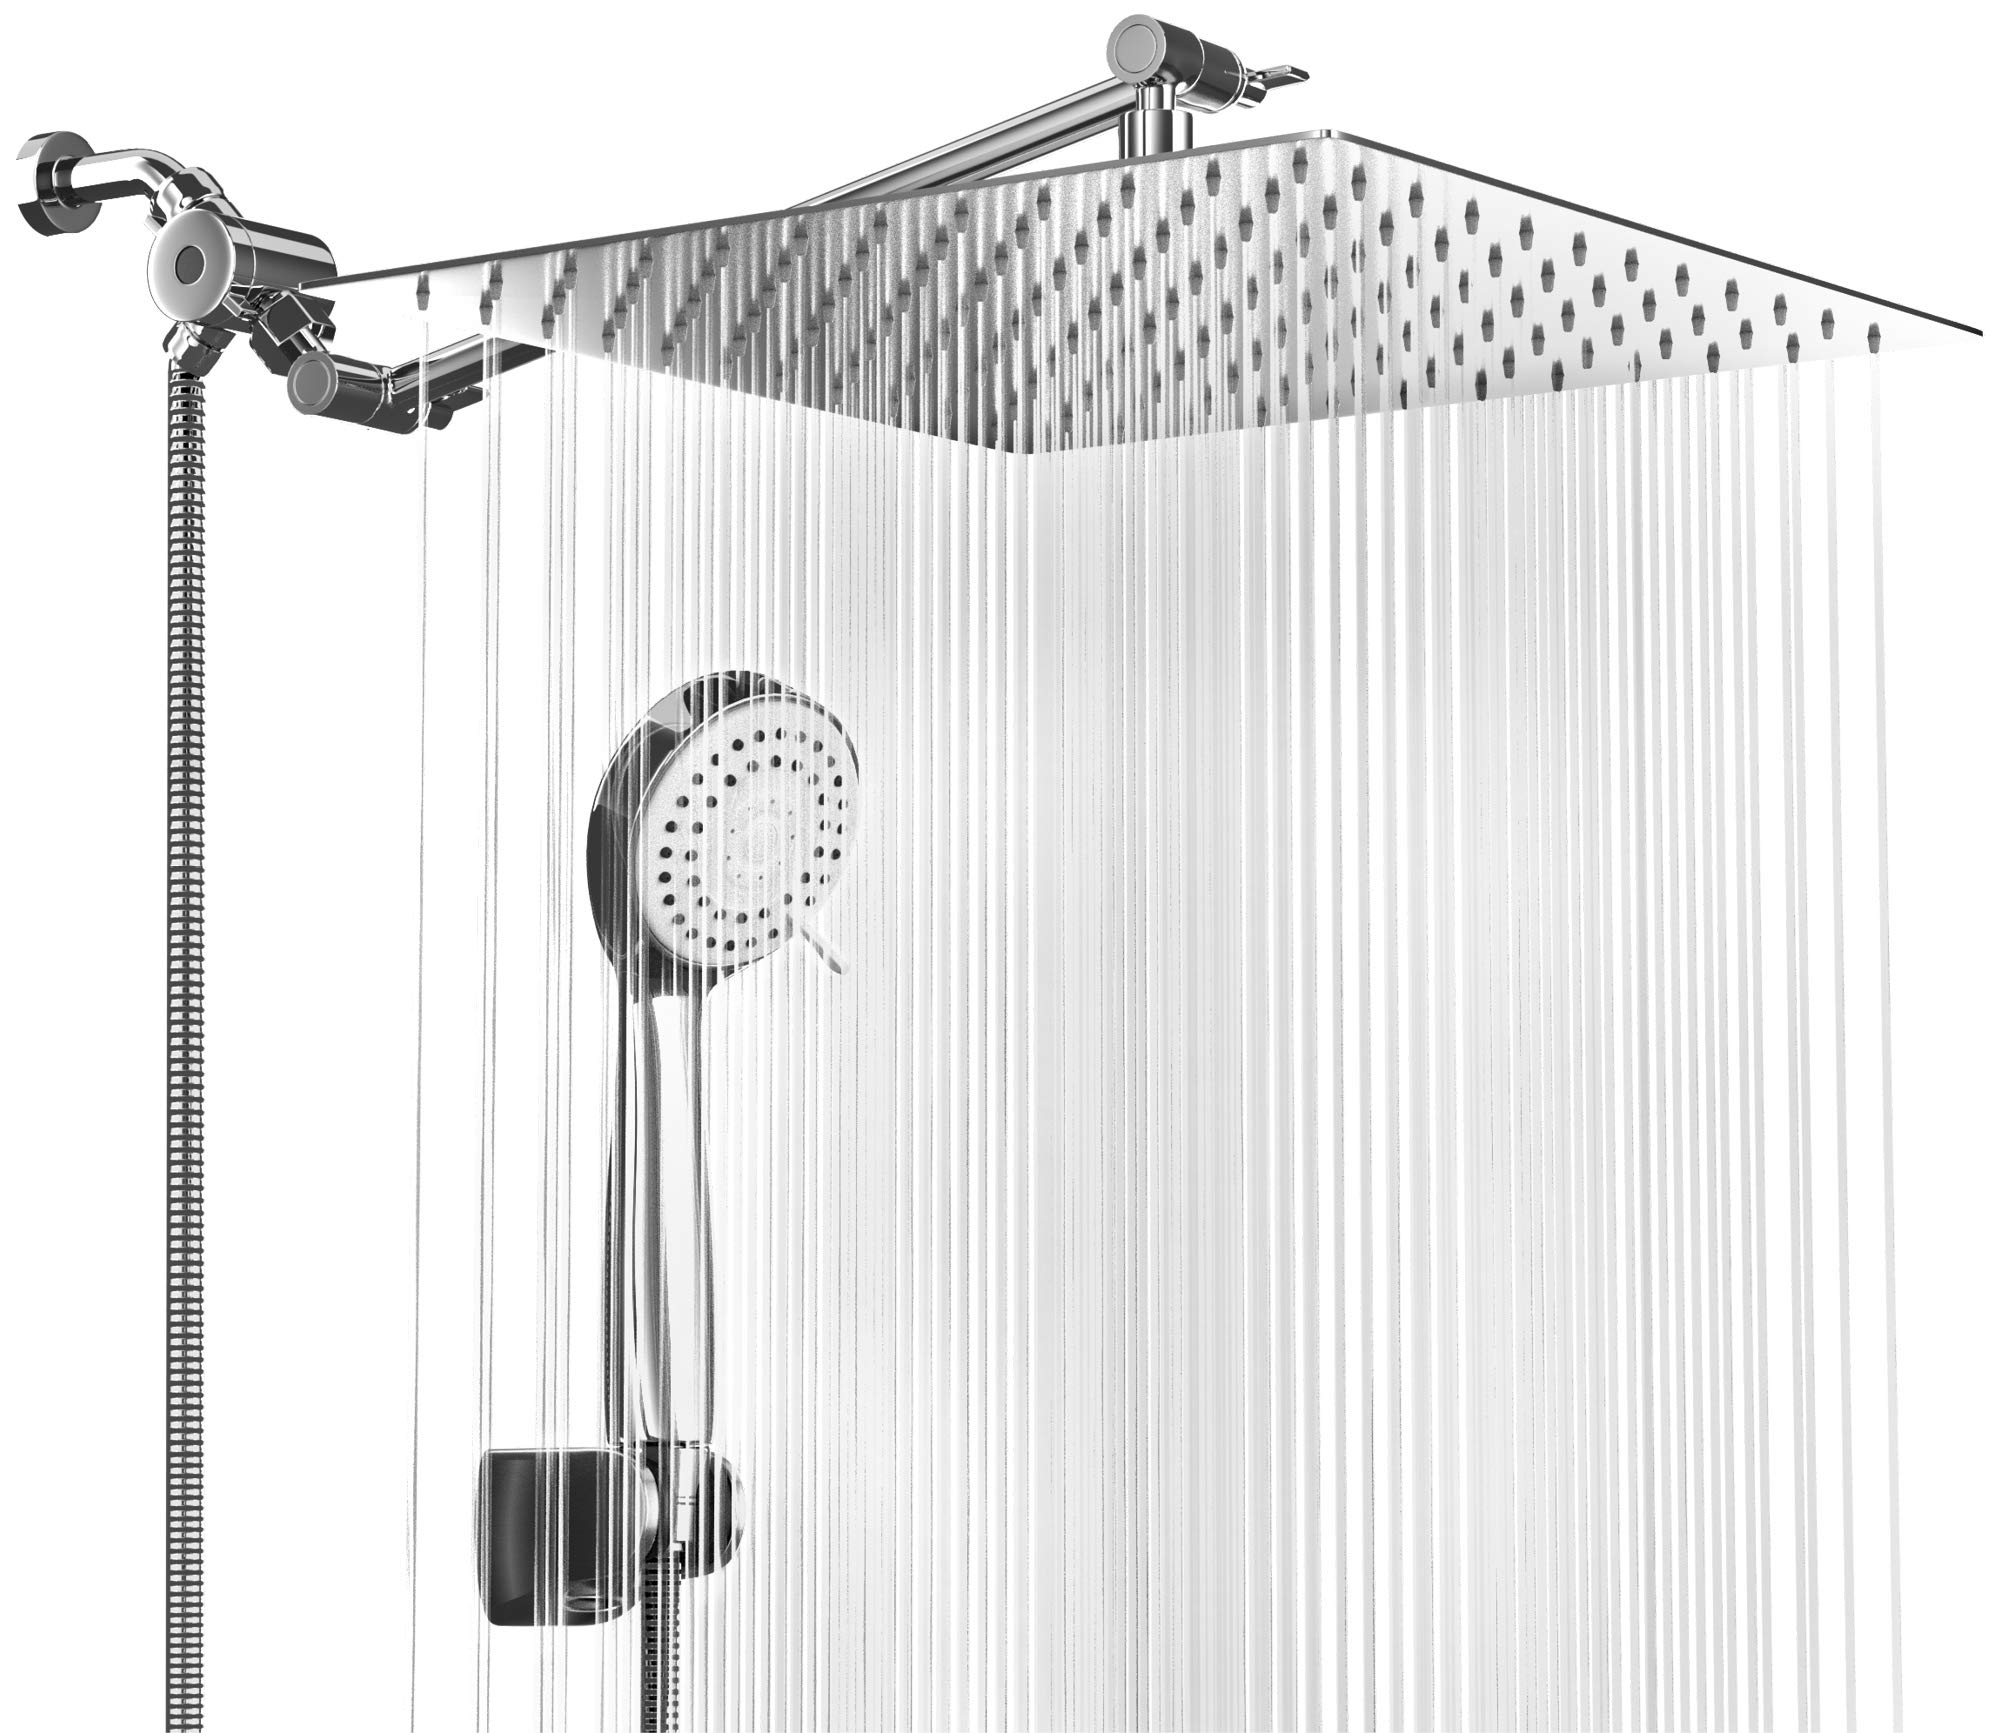 High Pressure Rainfall Shower Head and Hand Held Shower Head Combo with 70 Inch Hose for Bath and Adjustable Extender Arm - Easy Install Anti Clog Jet Nozzles - Universal Fit for High, Low Water Flow  - Like New